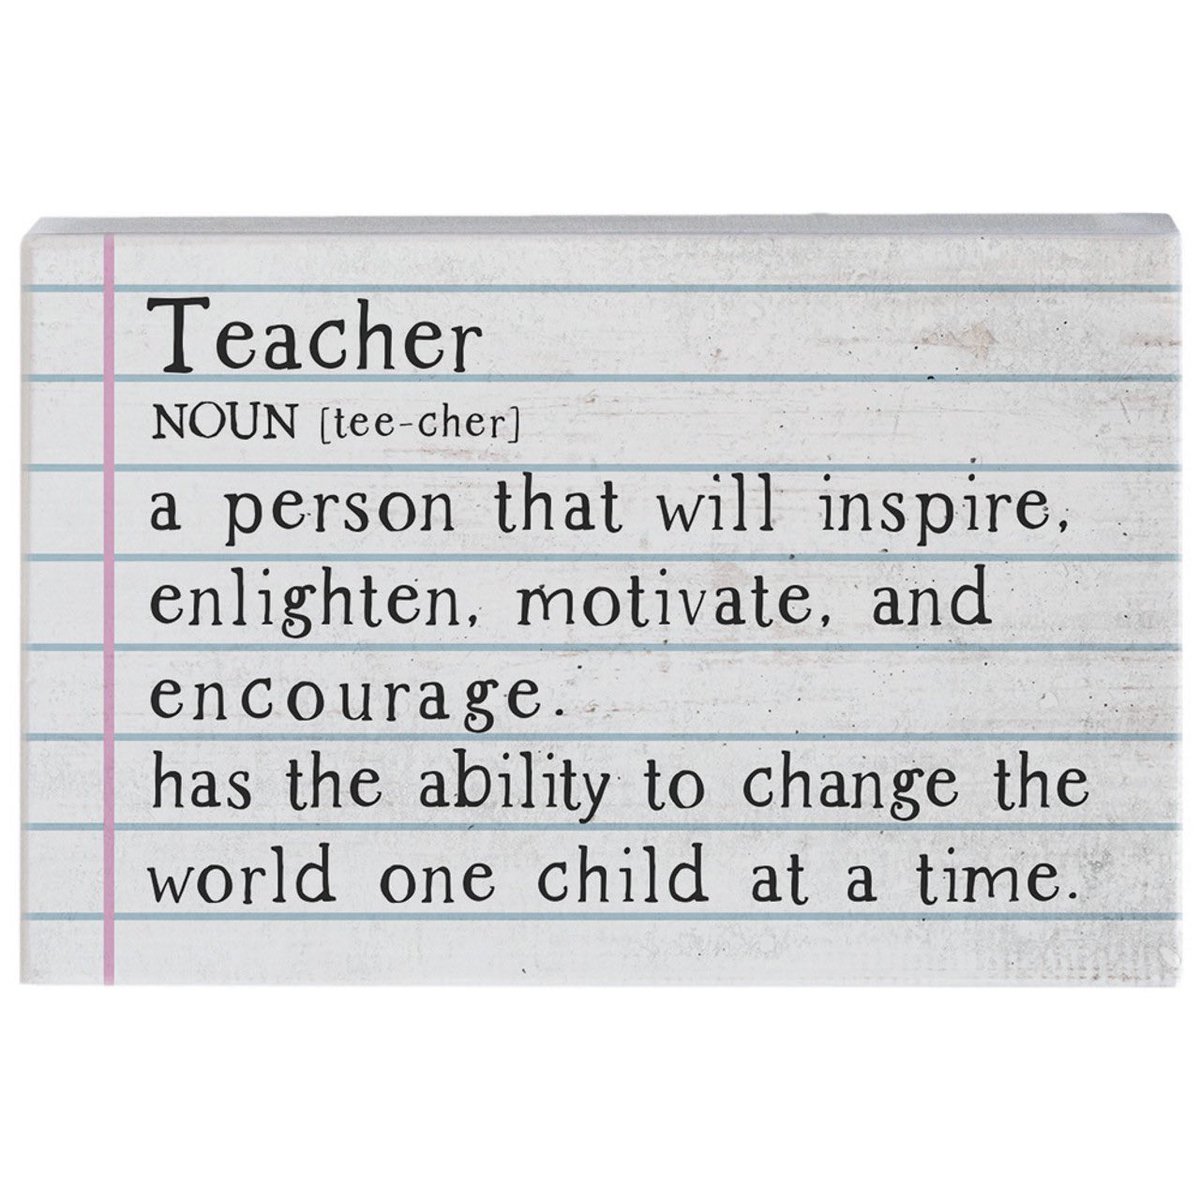 I can tell you without a shadow of a doubt that I wouldn’t be who I am today without the help and influence of public school teachers. Teachers helped changed the trajectory of my life, and they continue to change students' lives every day. We don’t need a week to remind us, but…